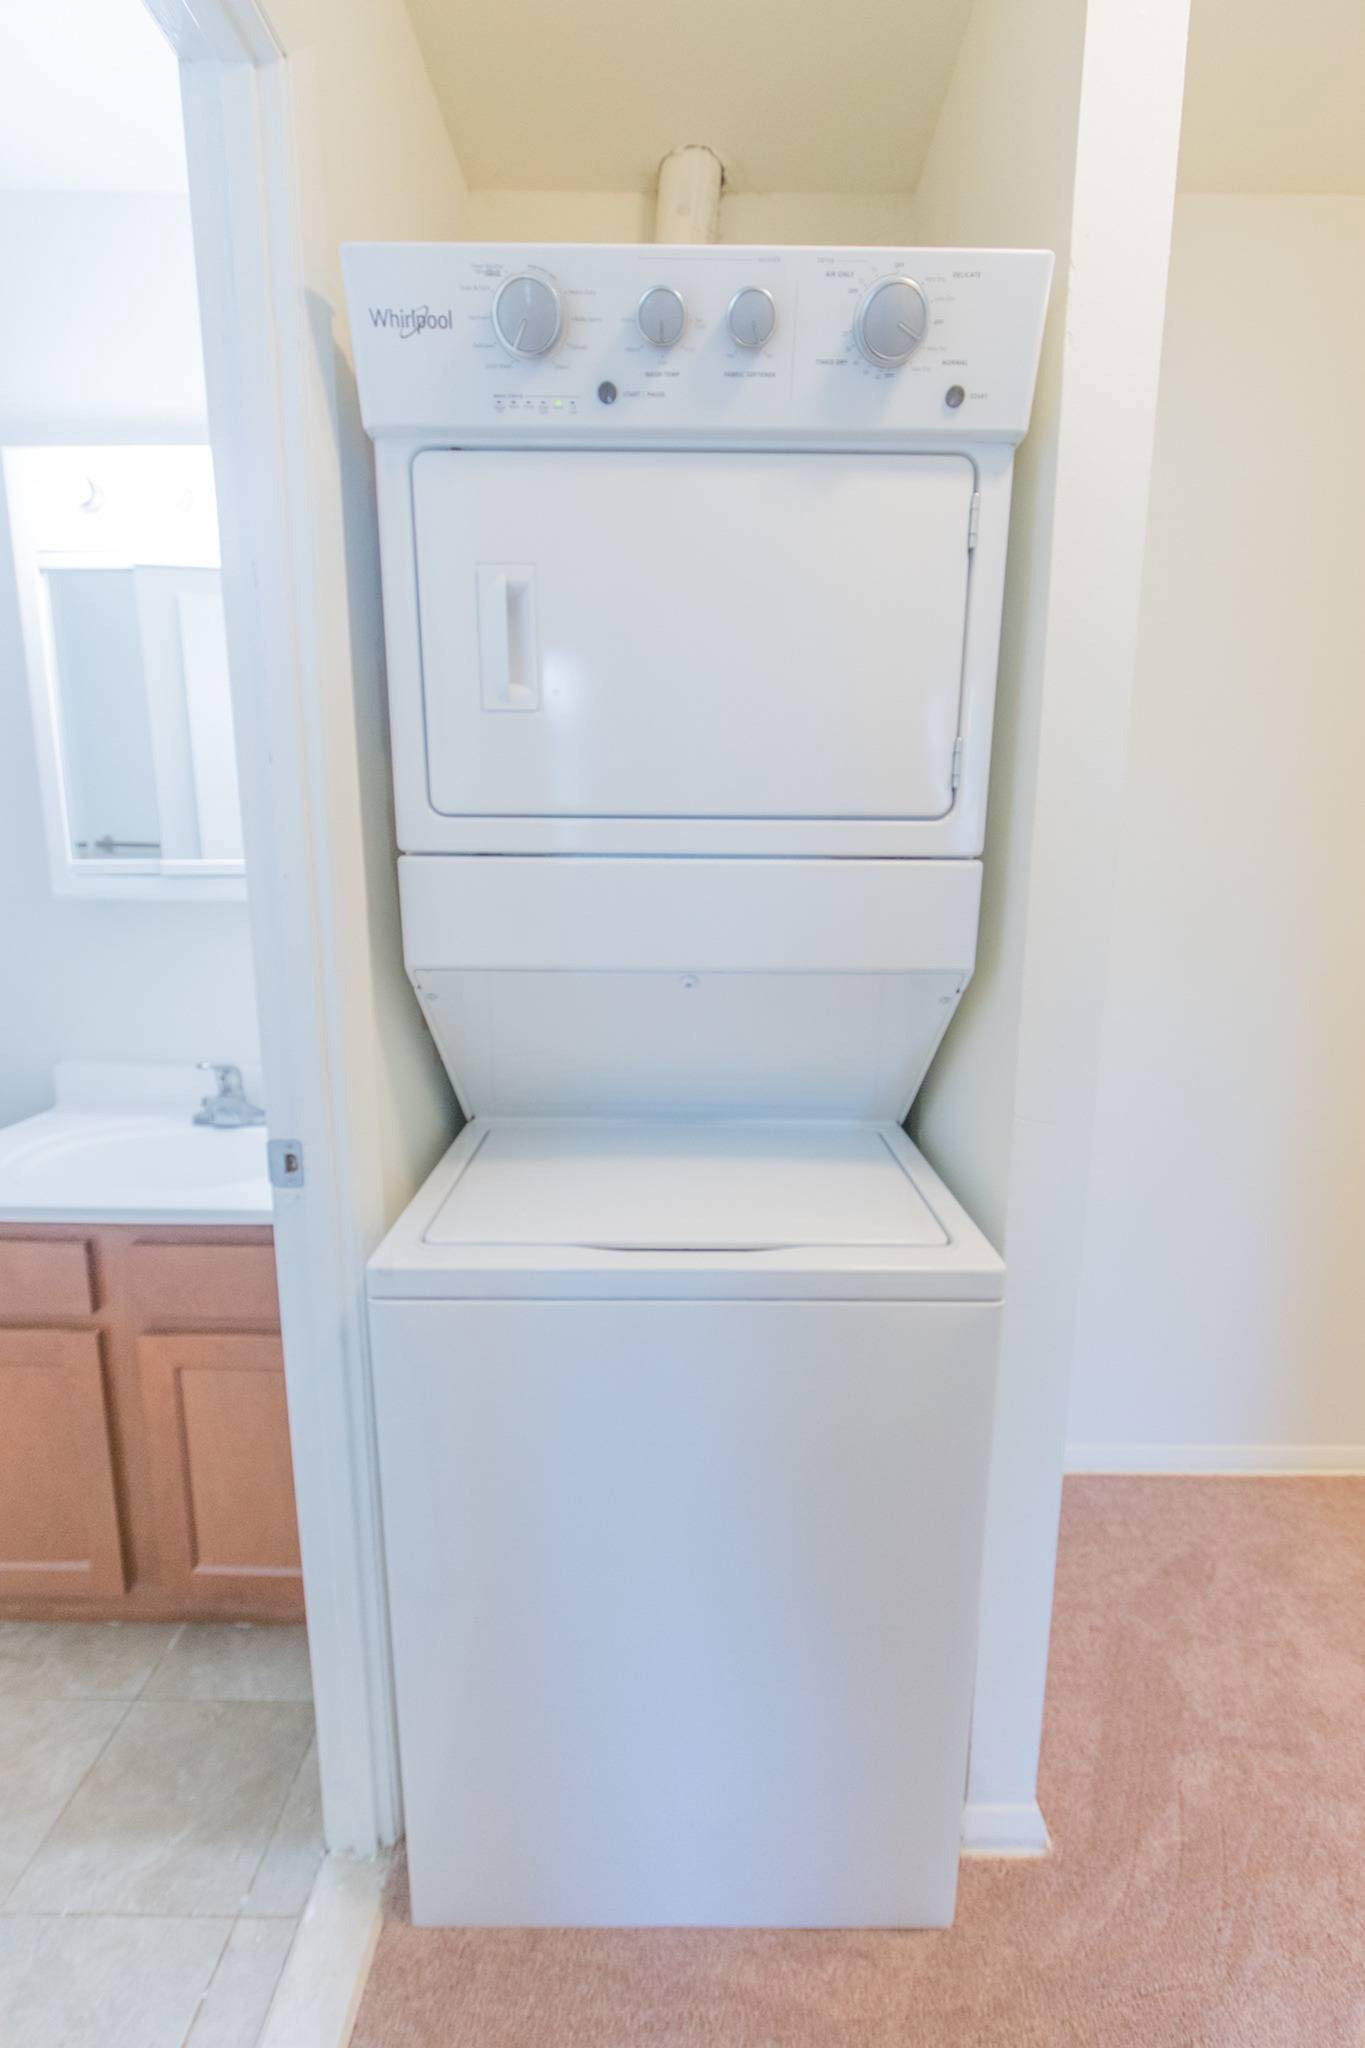 Stacked washer and dryer next to the bathroom.